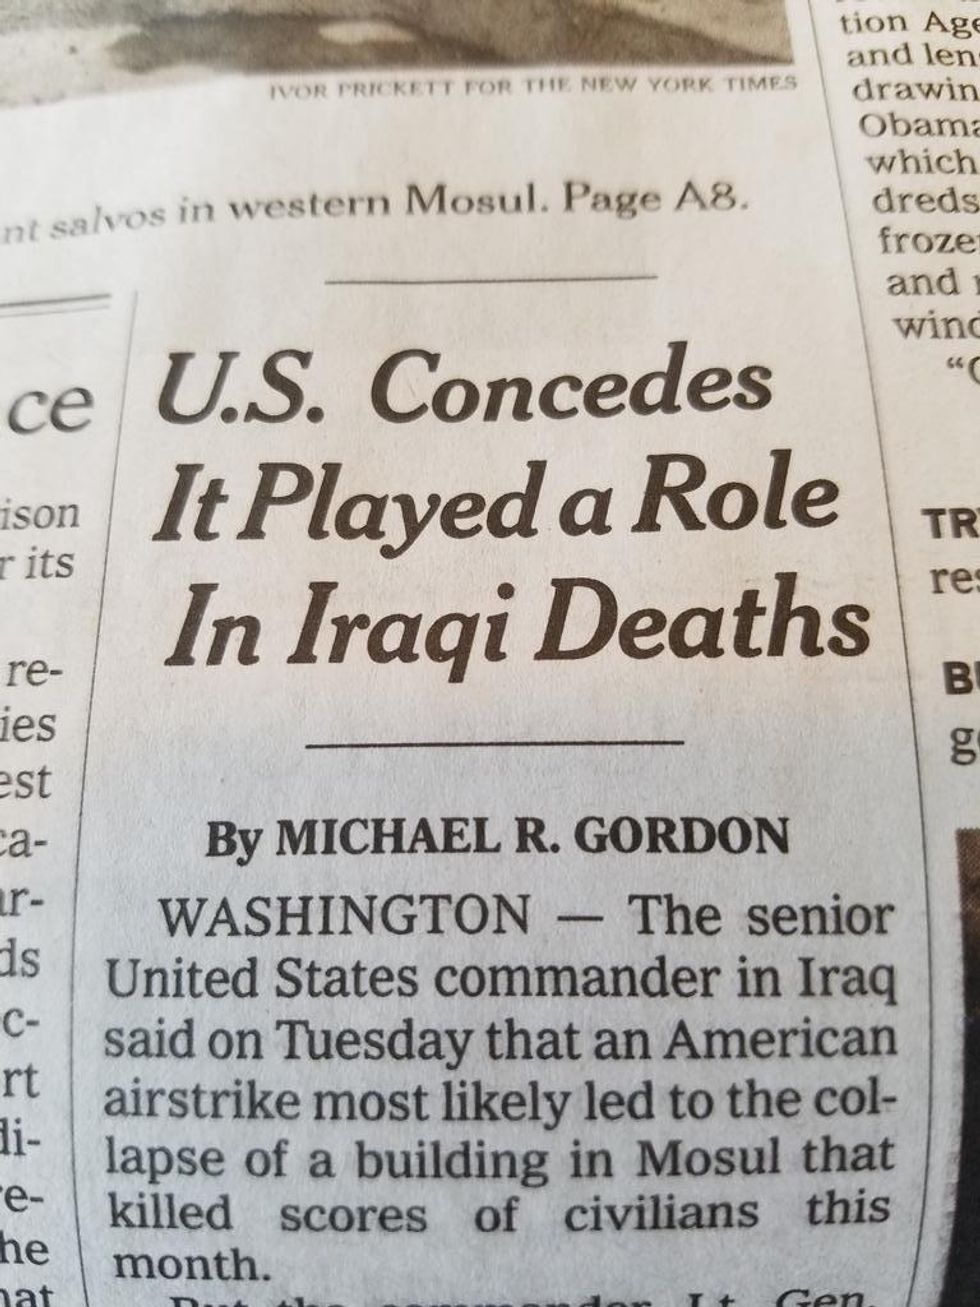 New York Times: US Concedes It Played a Role in Iraqi Deaths